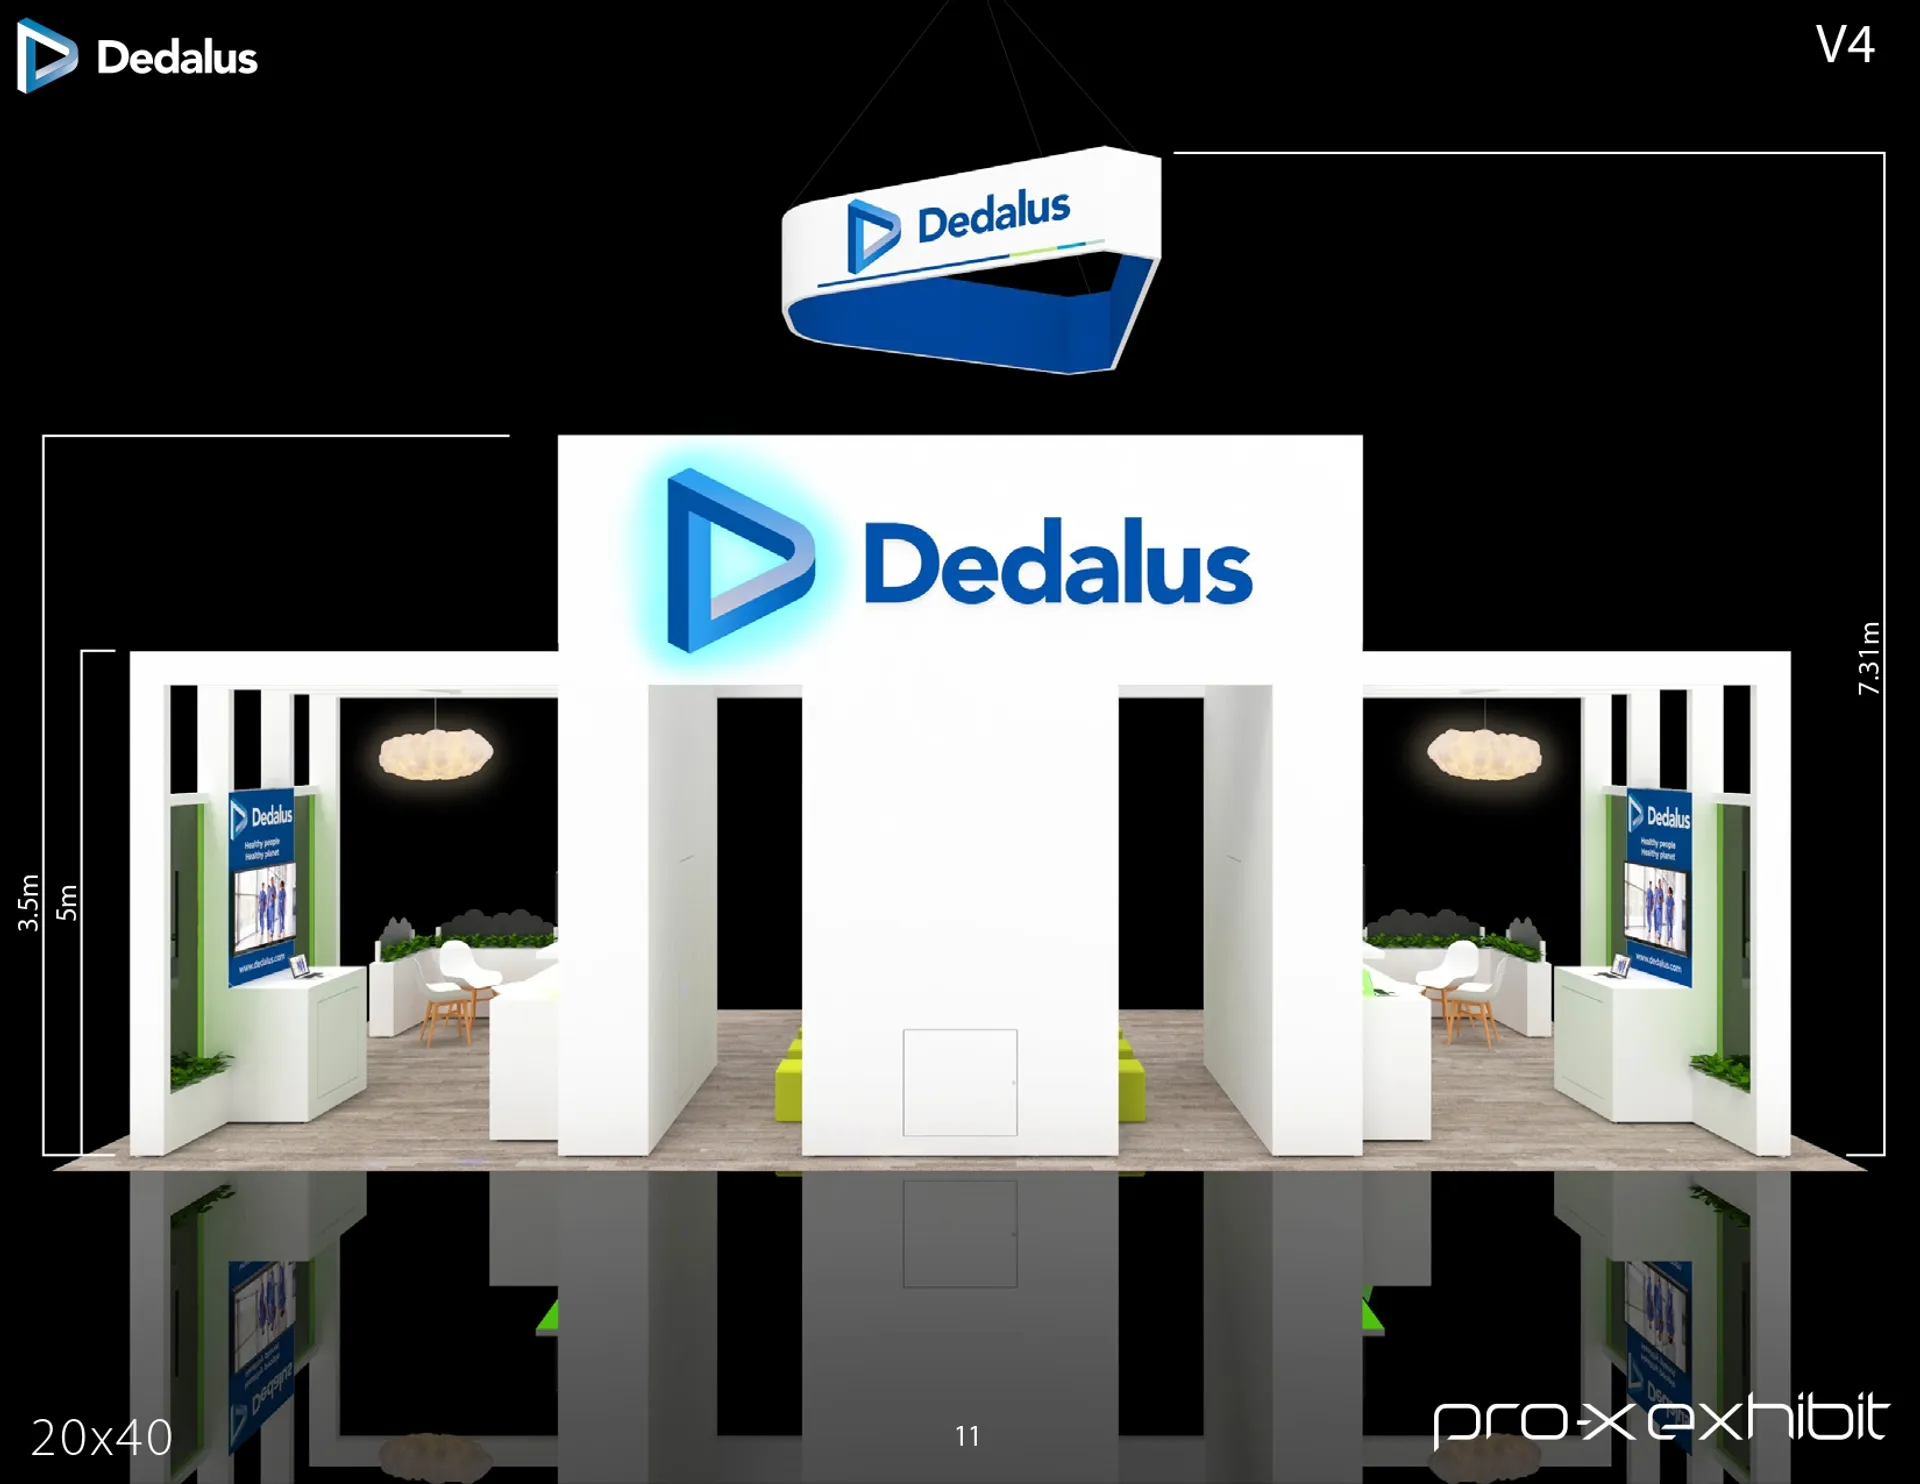 booth-design-projects/Pro-X Exhibits/2024-03-22-20x40-ISLAND-Project-50/DEDALUS_RSNA_20x40_V4-11_page-0001-xpi4gn.jpg